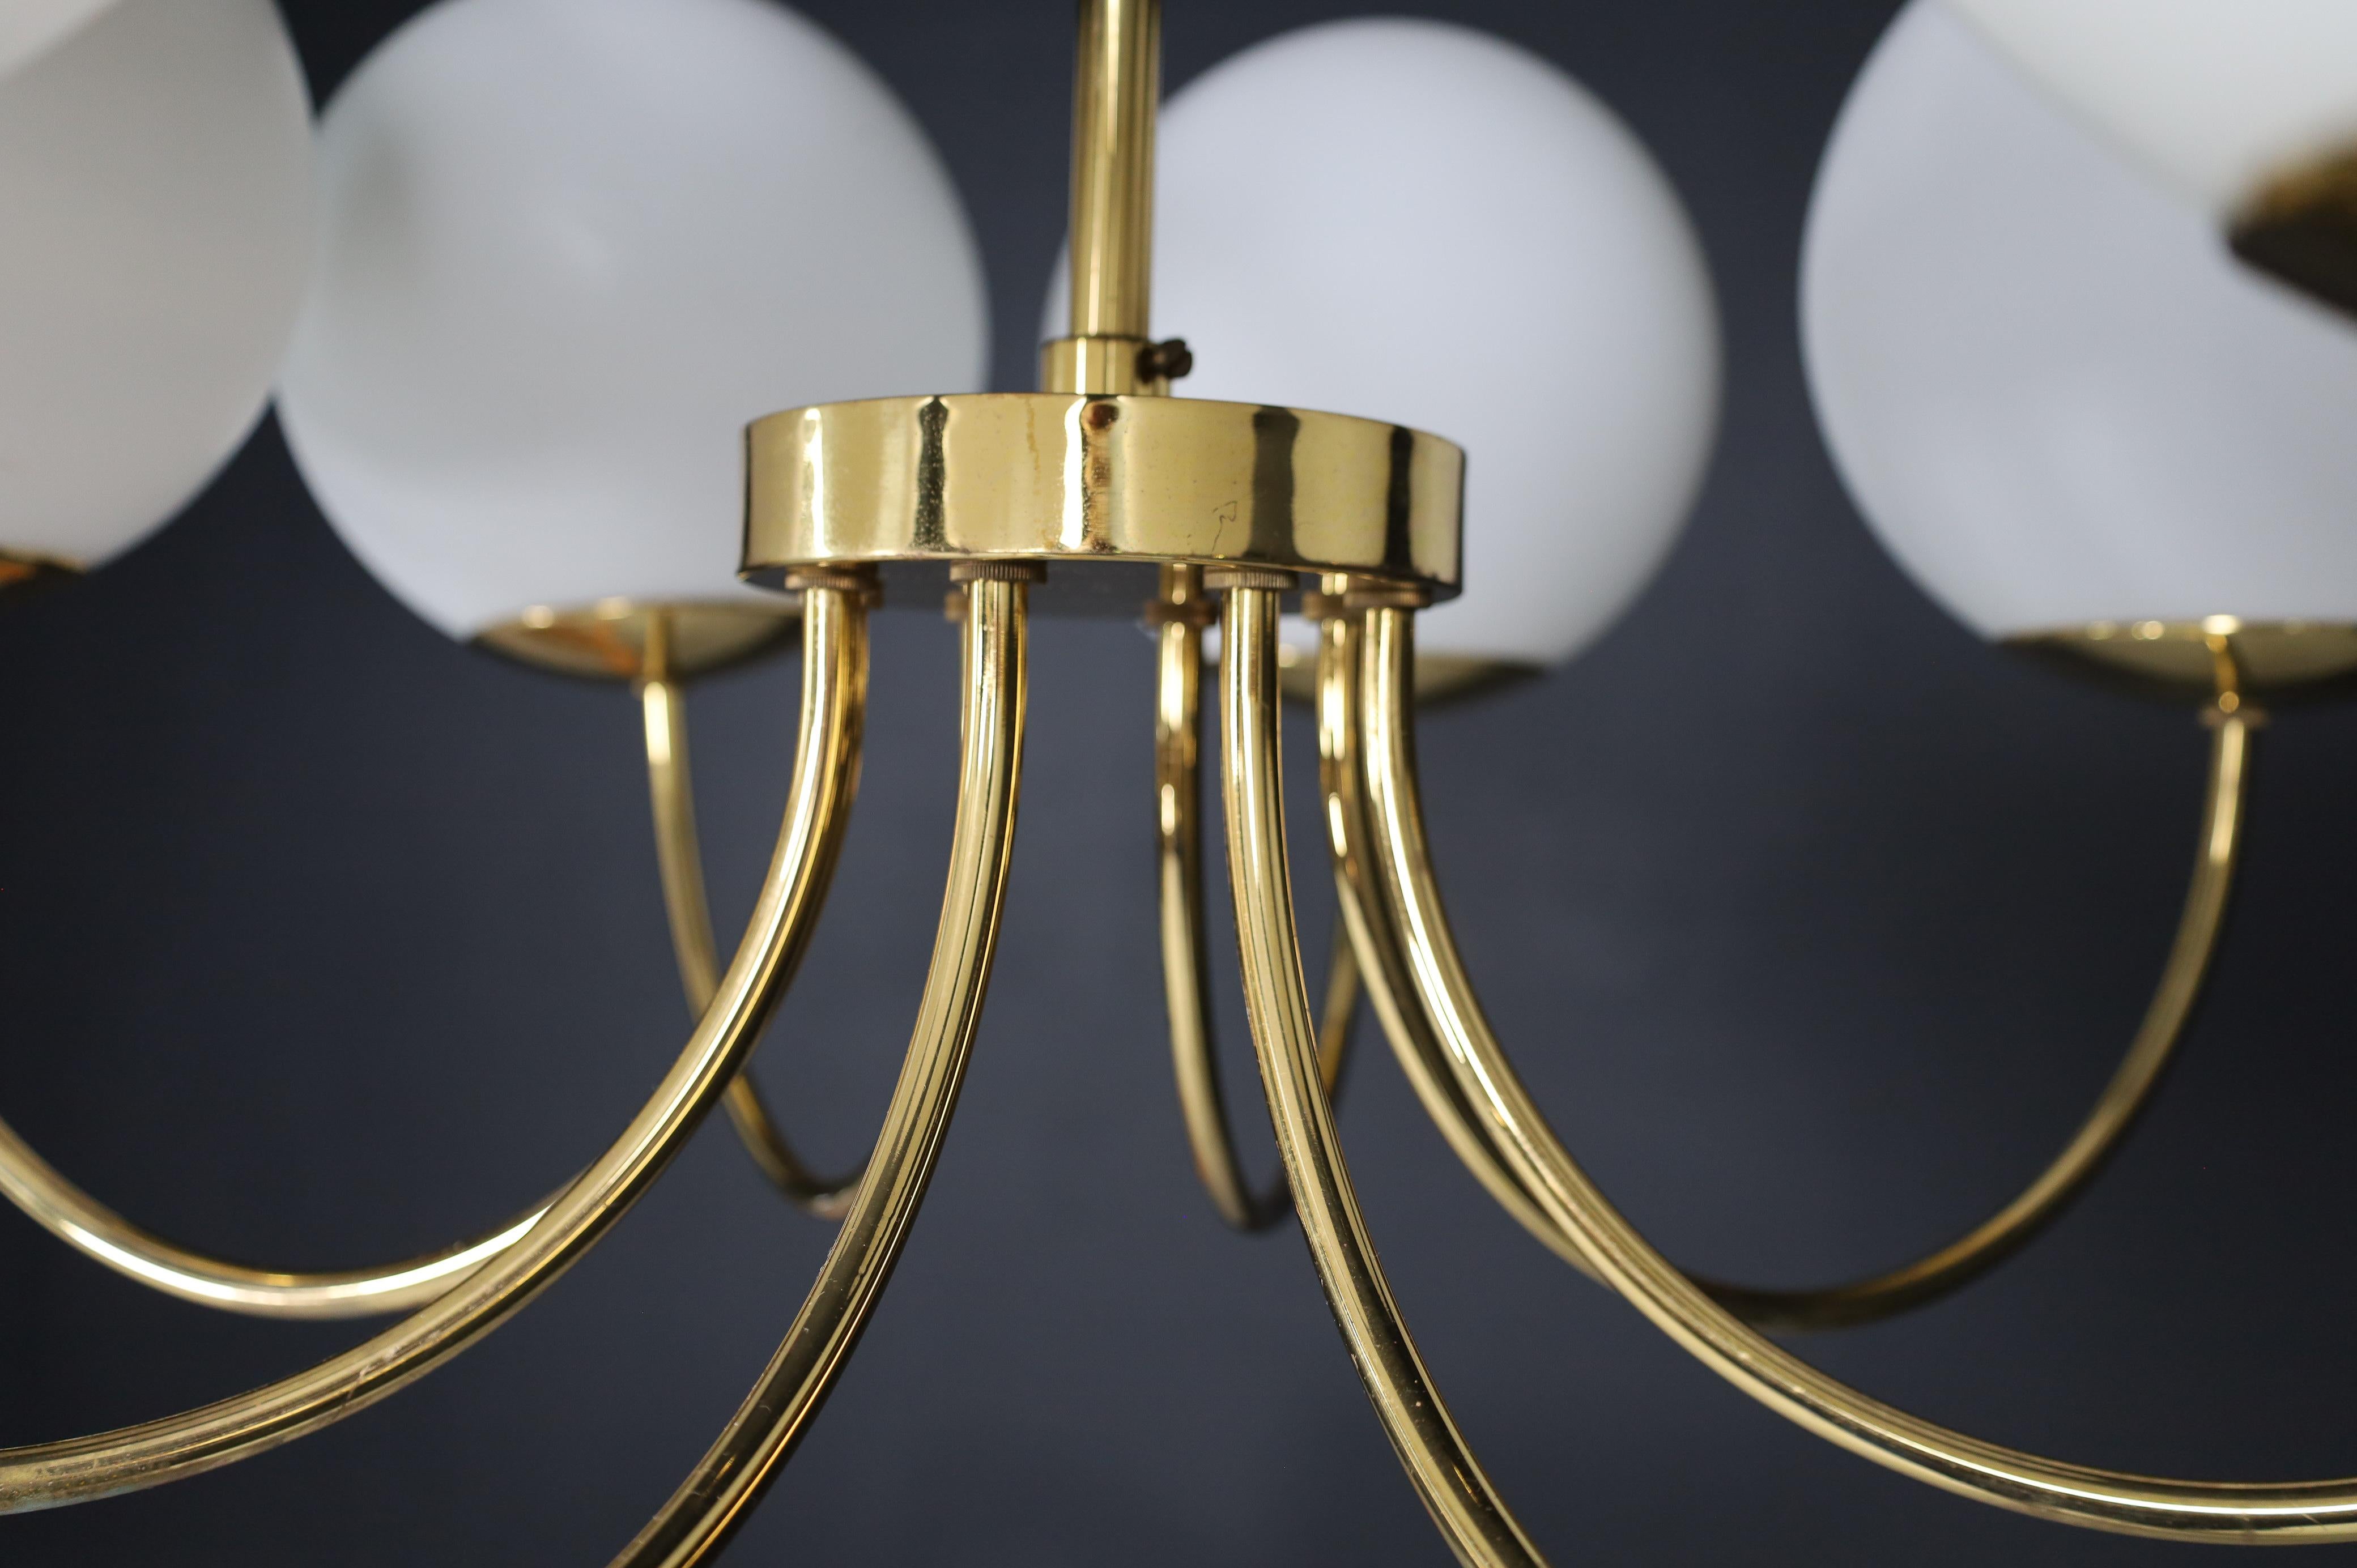 1 of 3 Elegant Chandeliers with Brass Fixture and Opaline Glass Globes, 1960s For Sale 8